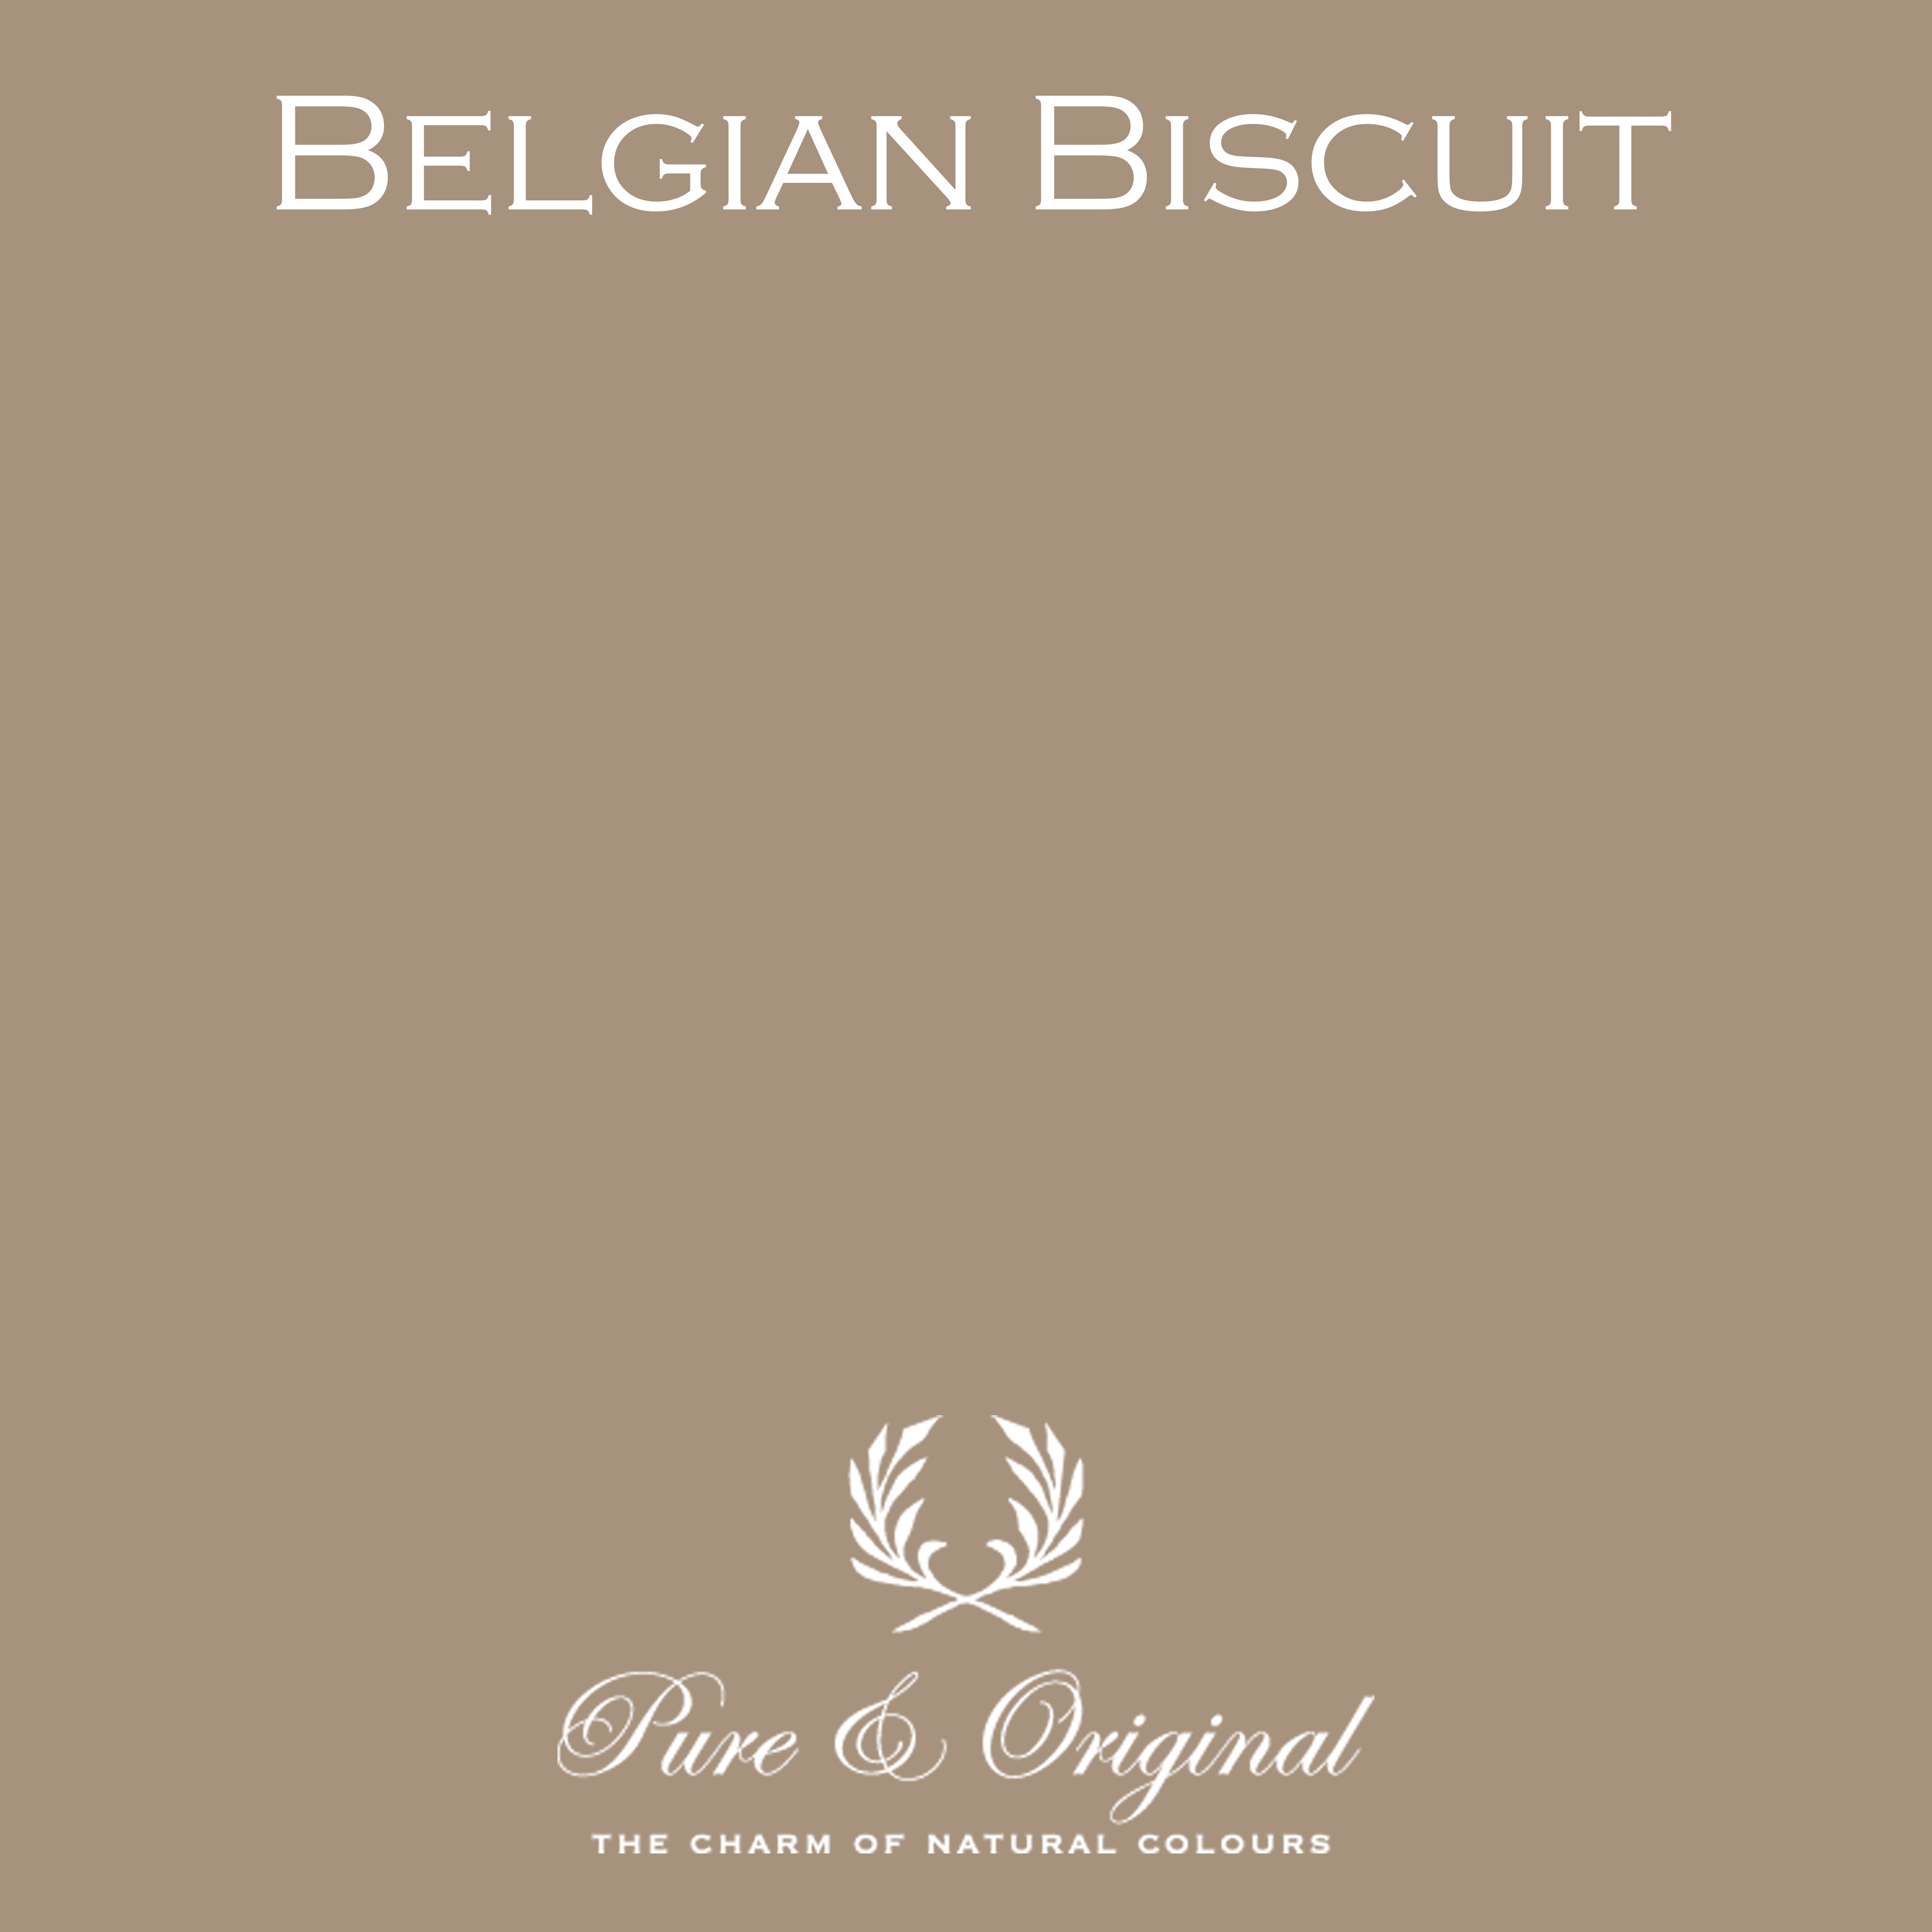 Traditional Paint Eggshell "Belgian Biscuit"